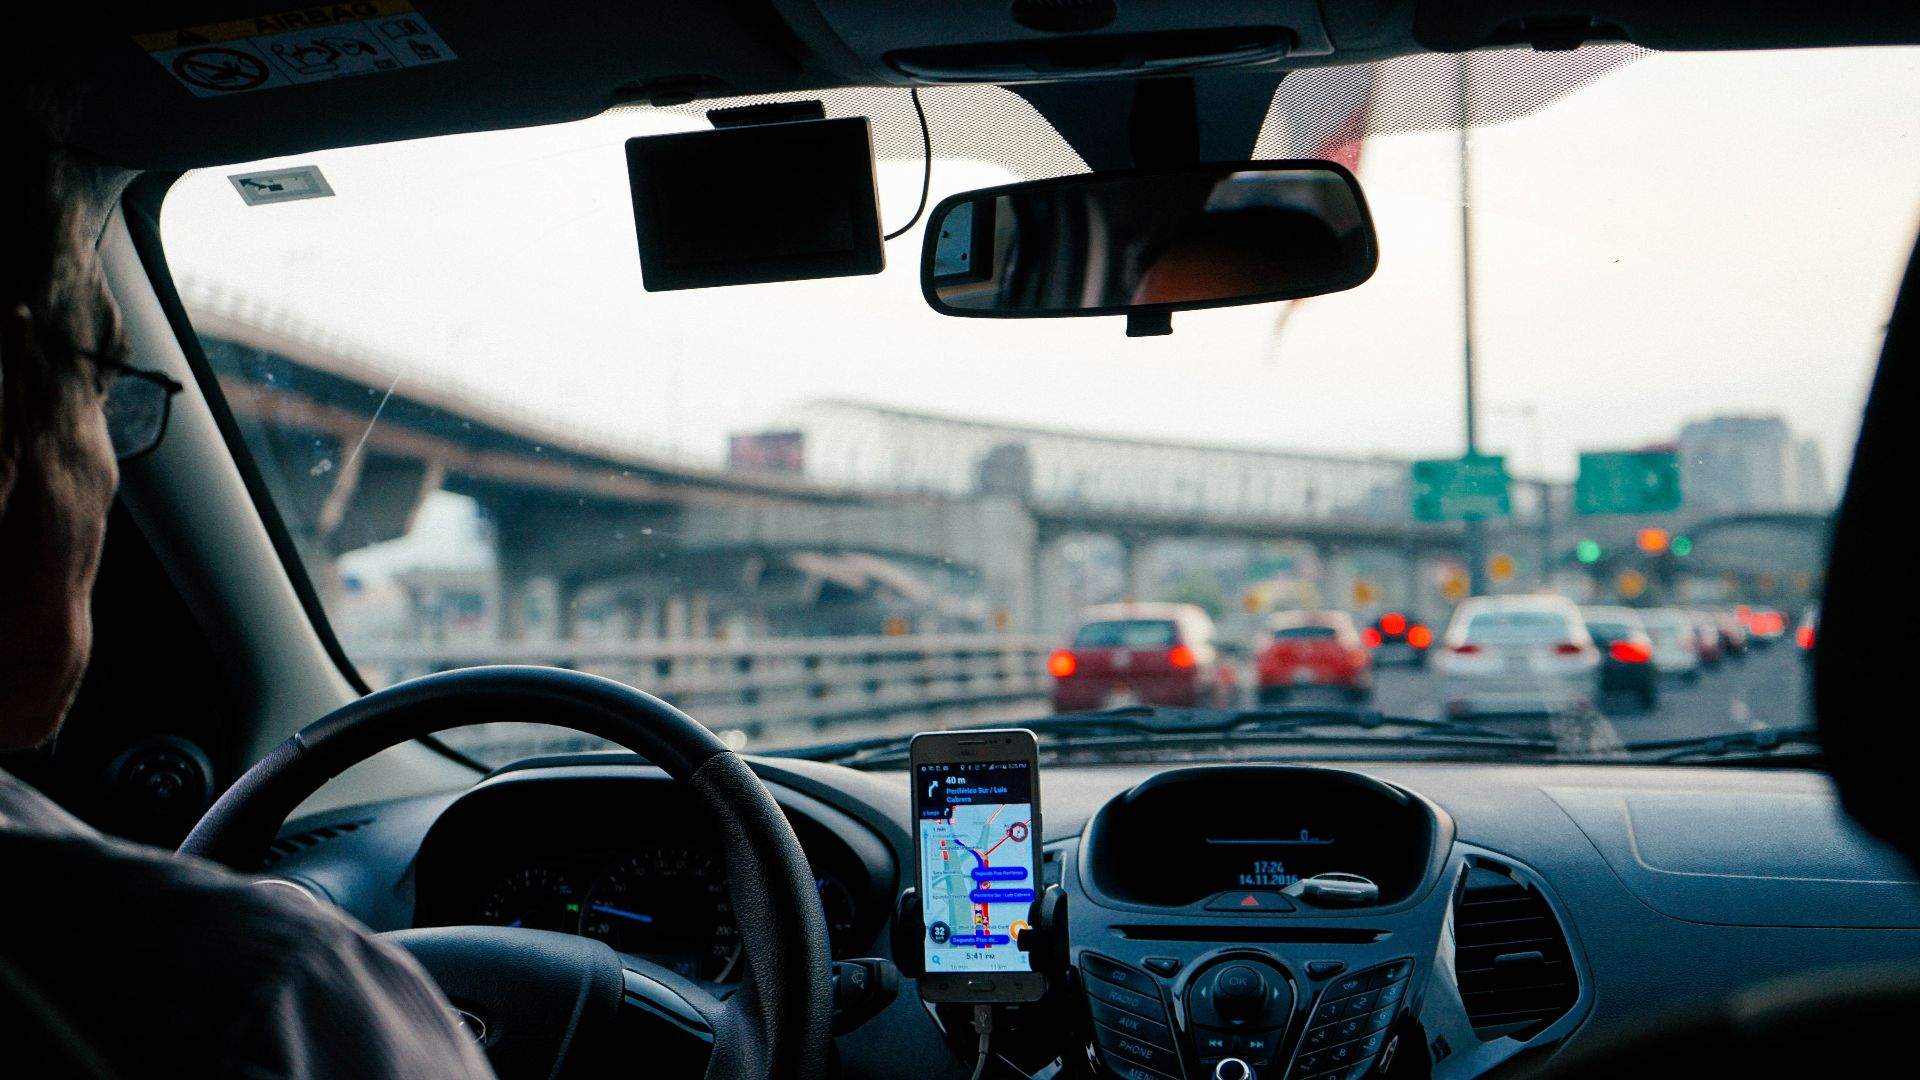 You Might Soon Be Able to Pay for Ubers With Your Opal Account Thanks to a New Digital Trial